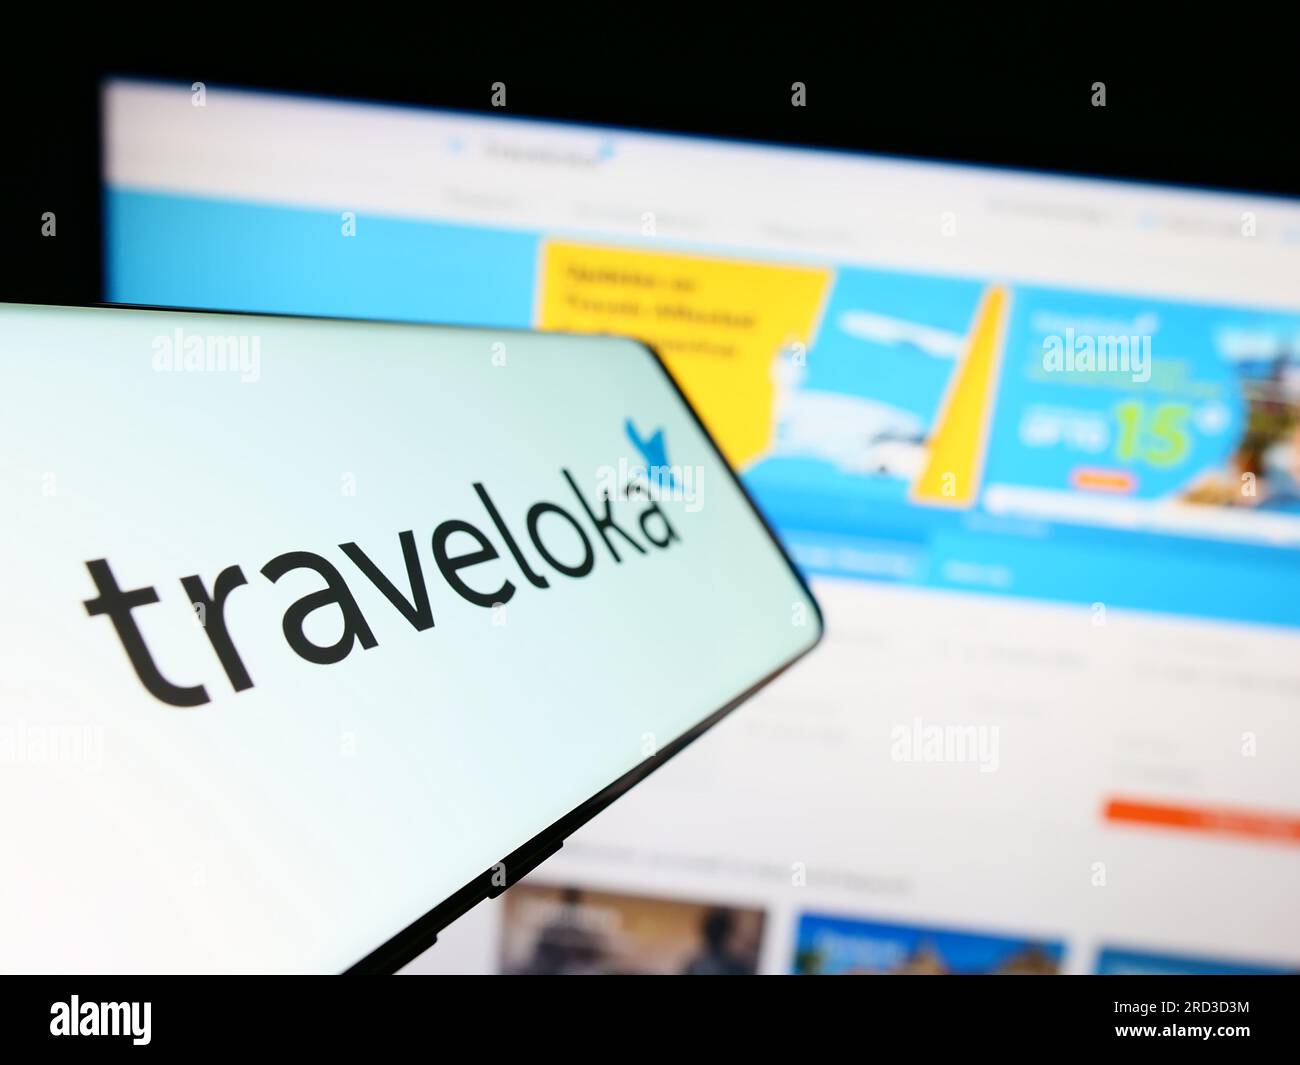 Smartphone with logo of Indonesian travel company Traveloka on screen in front of business website. Focus on center-left of phone display. Stock Photo